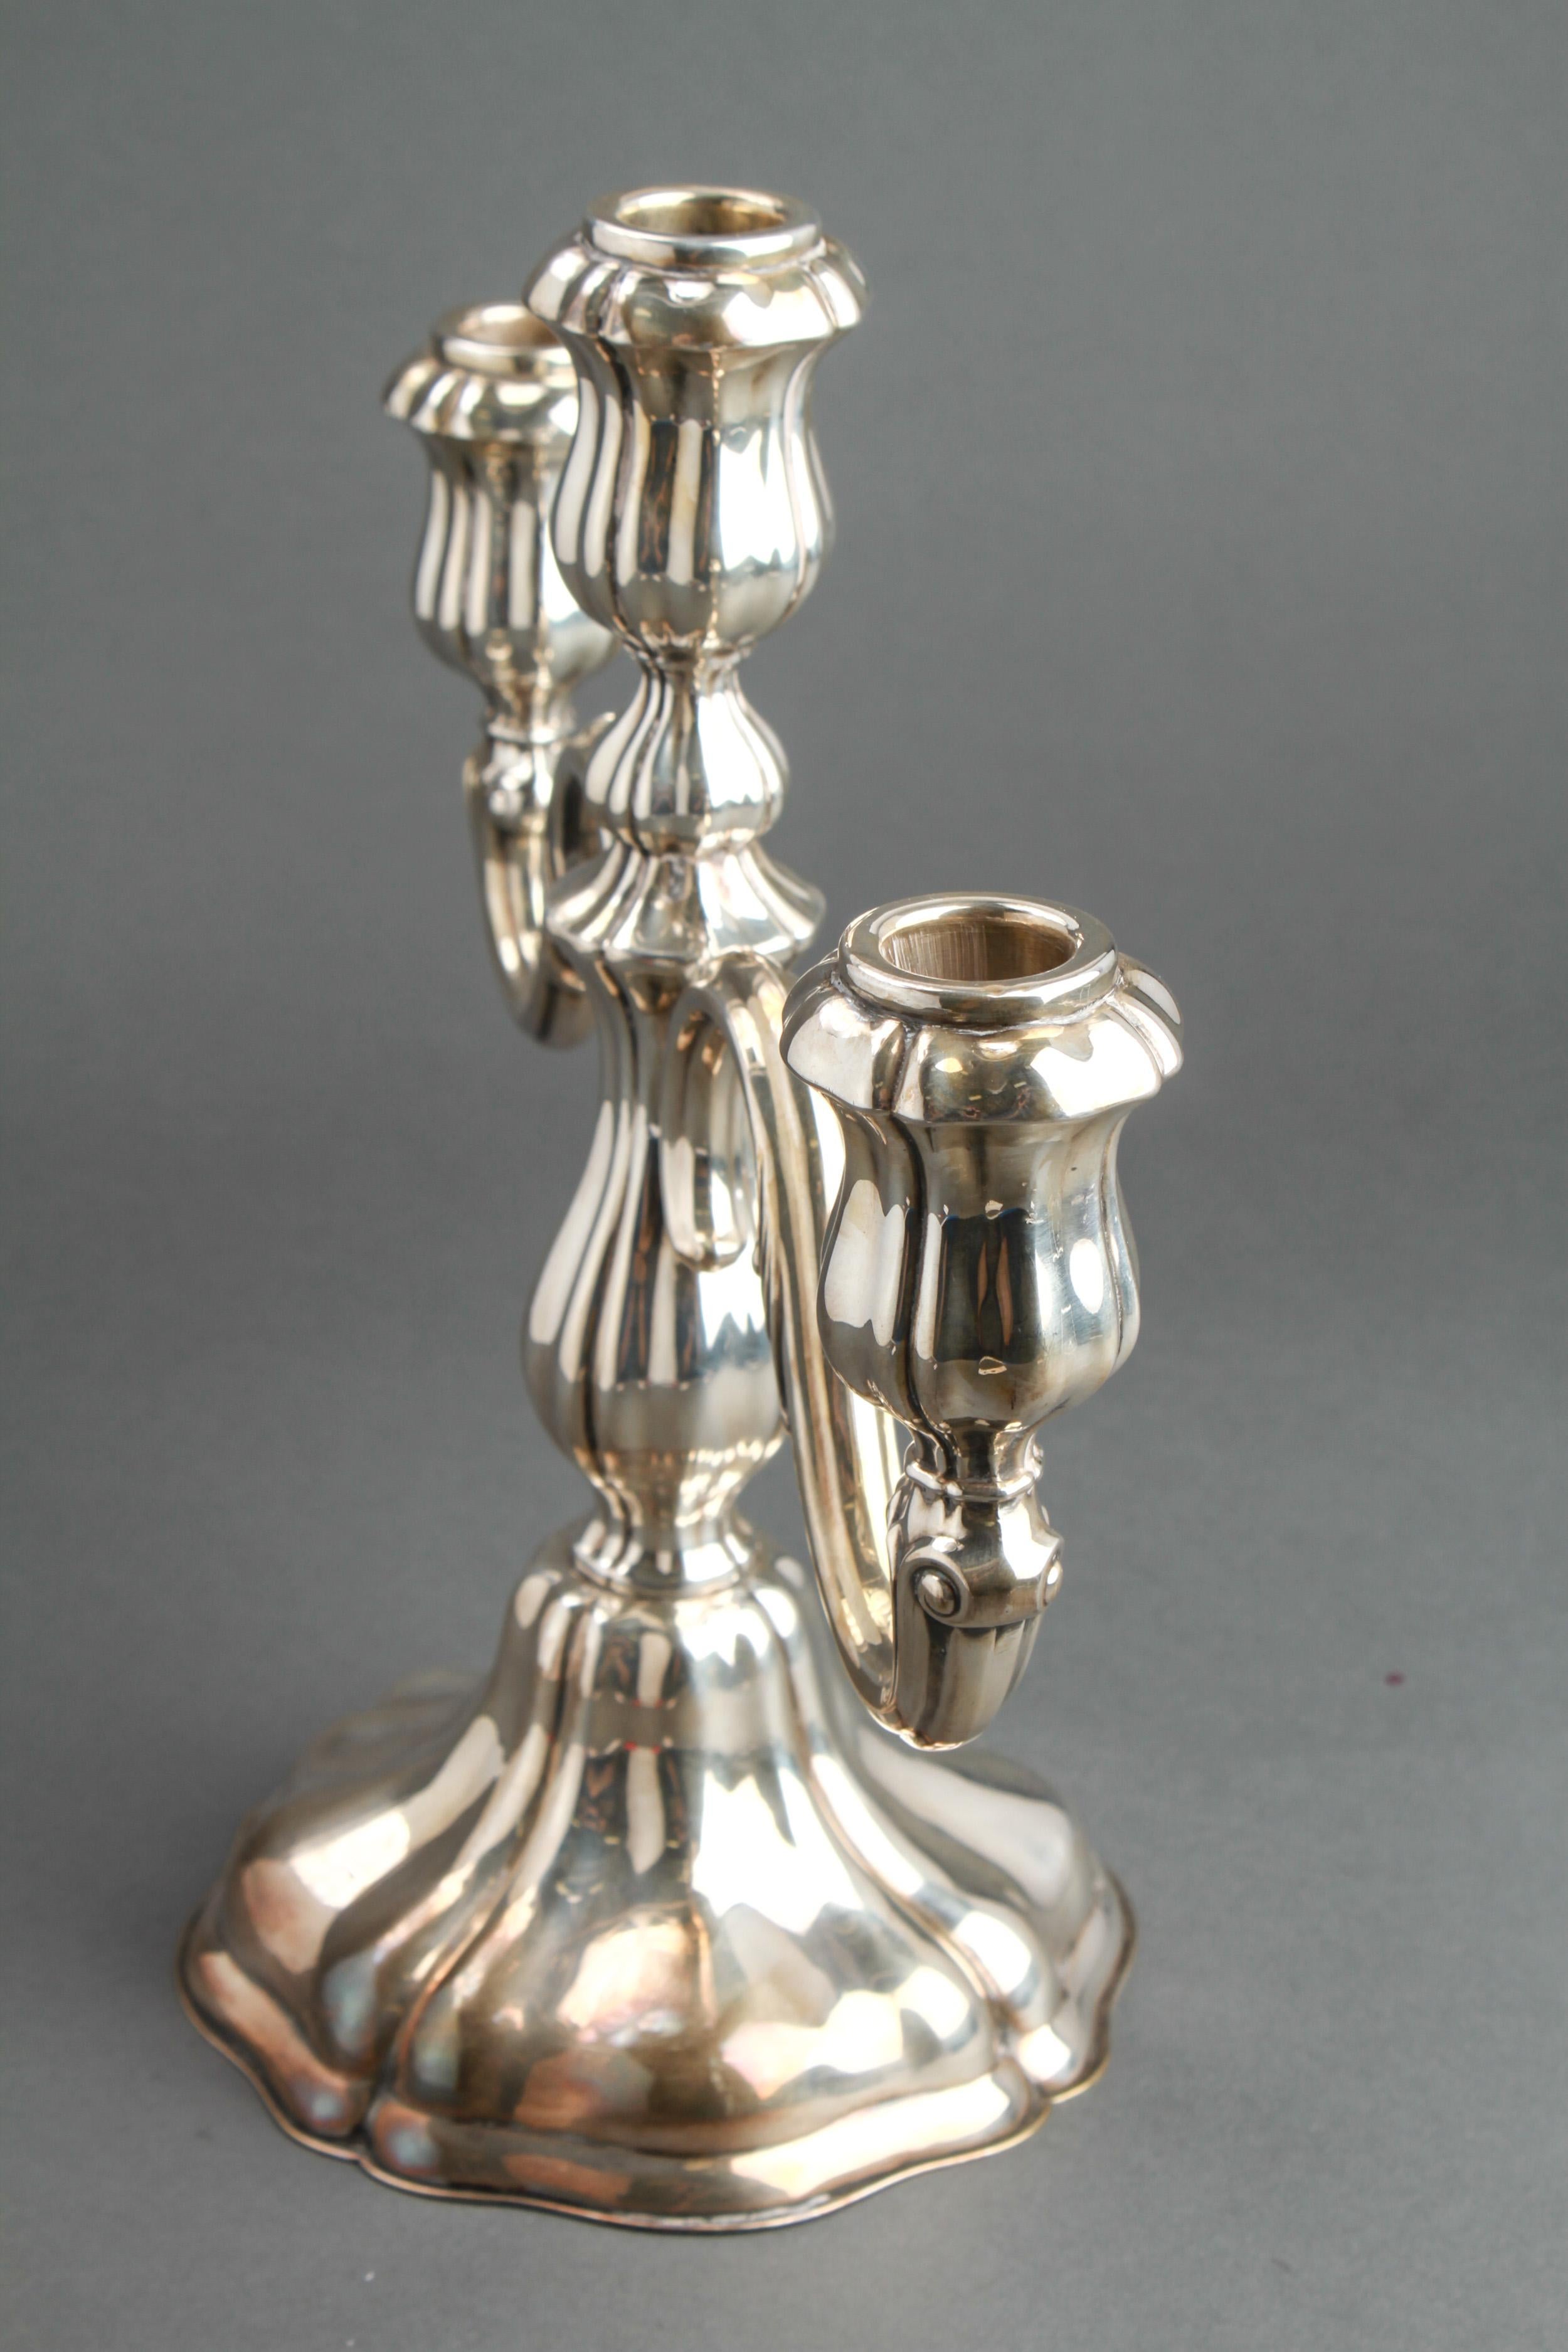 Neoclassical Revival Continental German Silver Candelabra